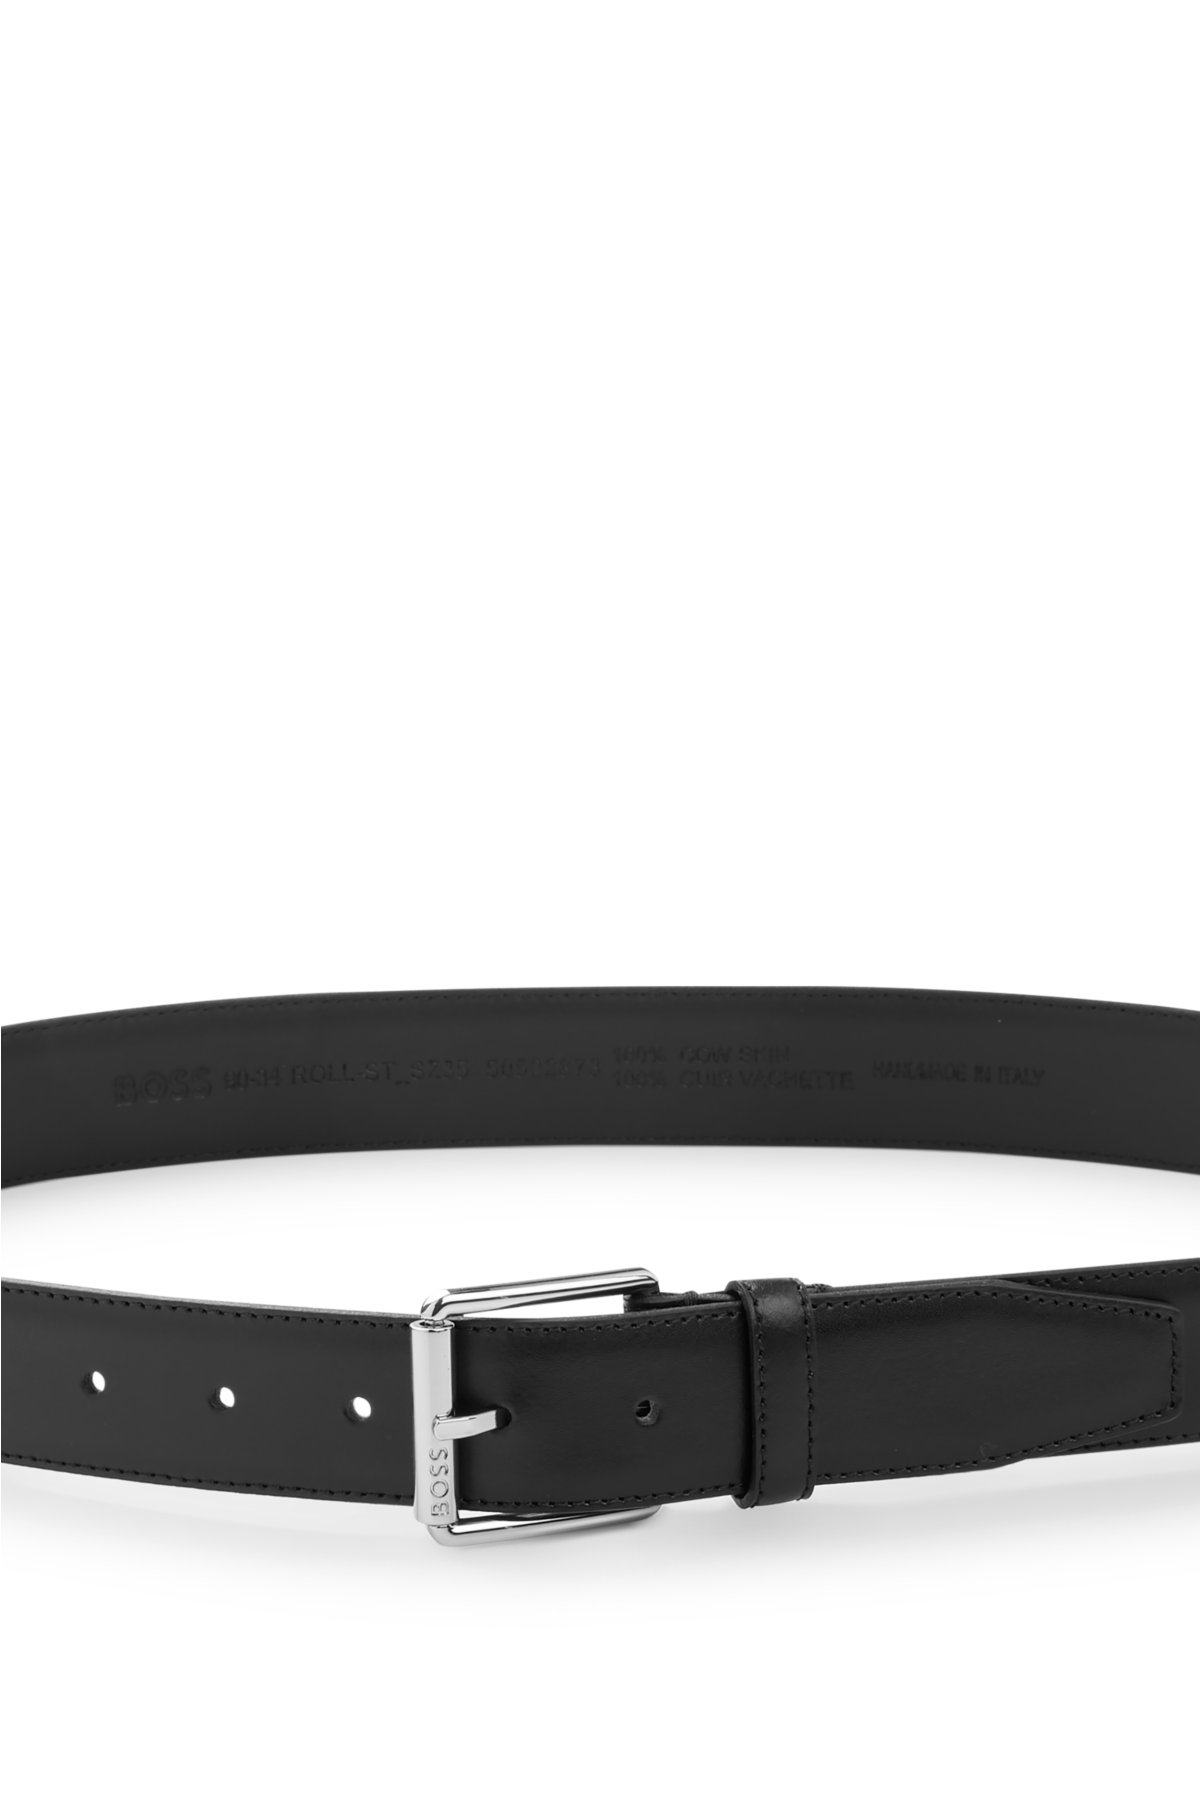 Italian-leather belt with roller buckle, Black